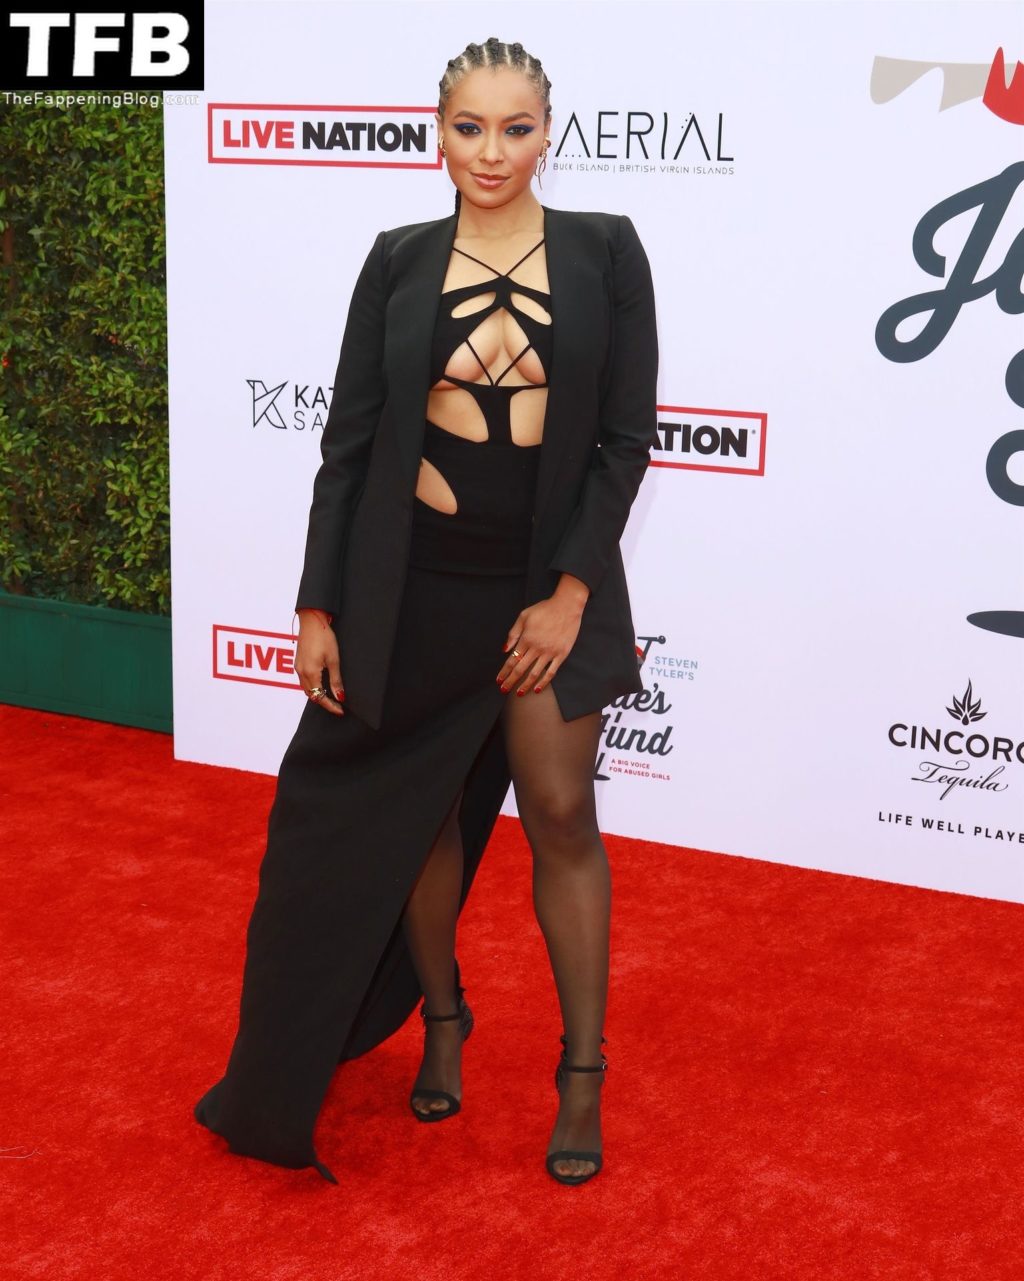 Kat Graham Displays Her Underboob at the 4th Annual Grammy Awards Viewing Party (13 Photos)